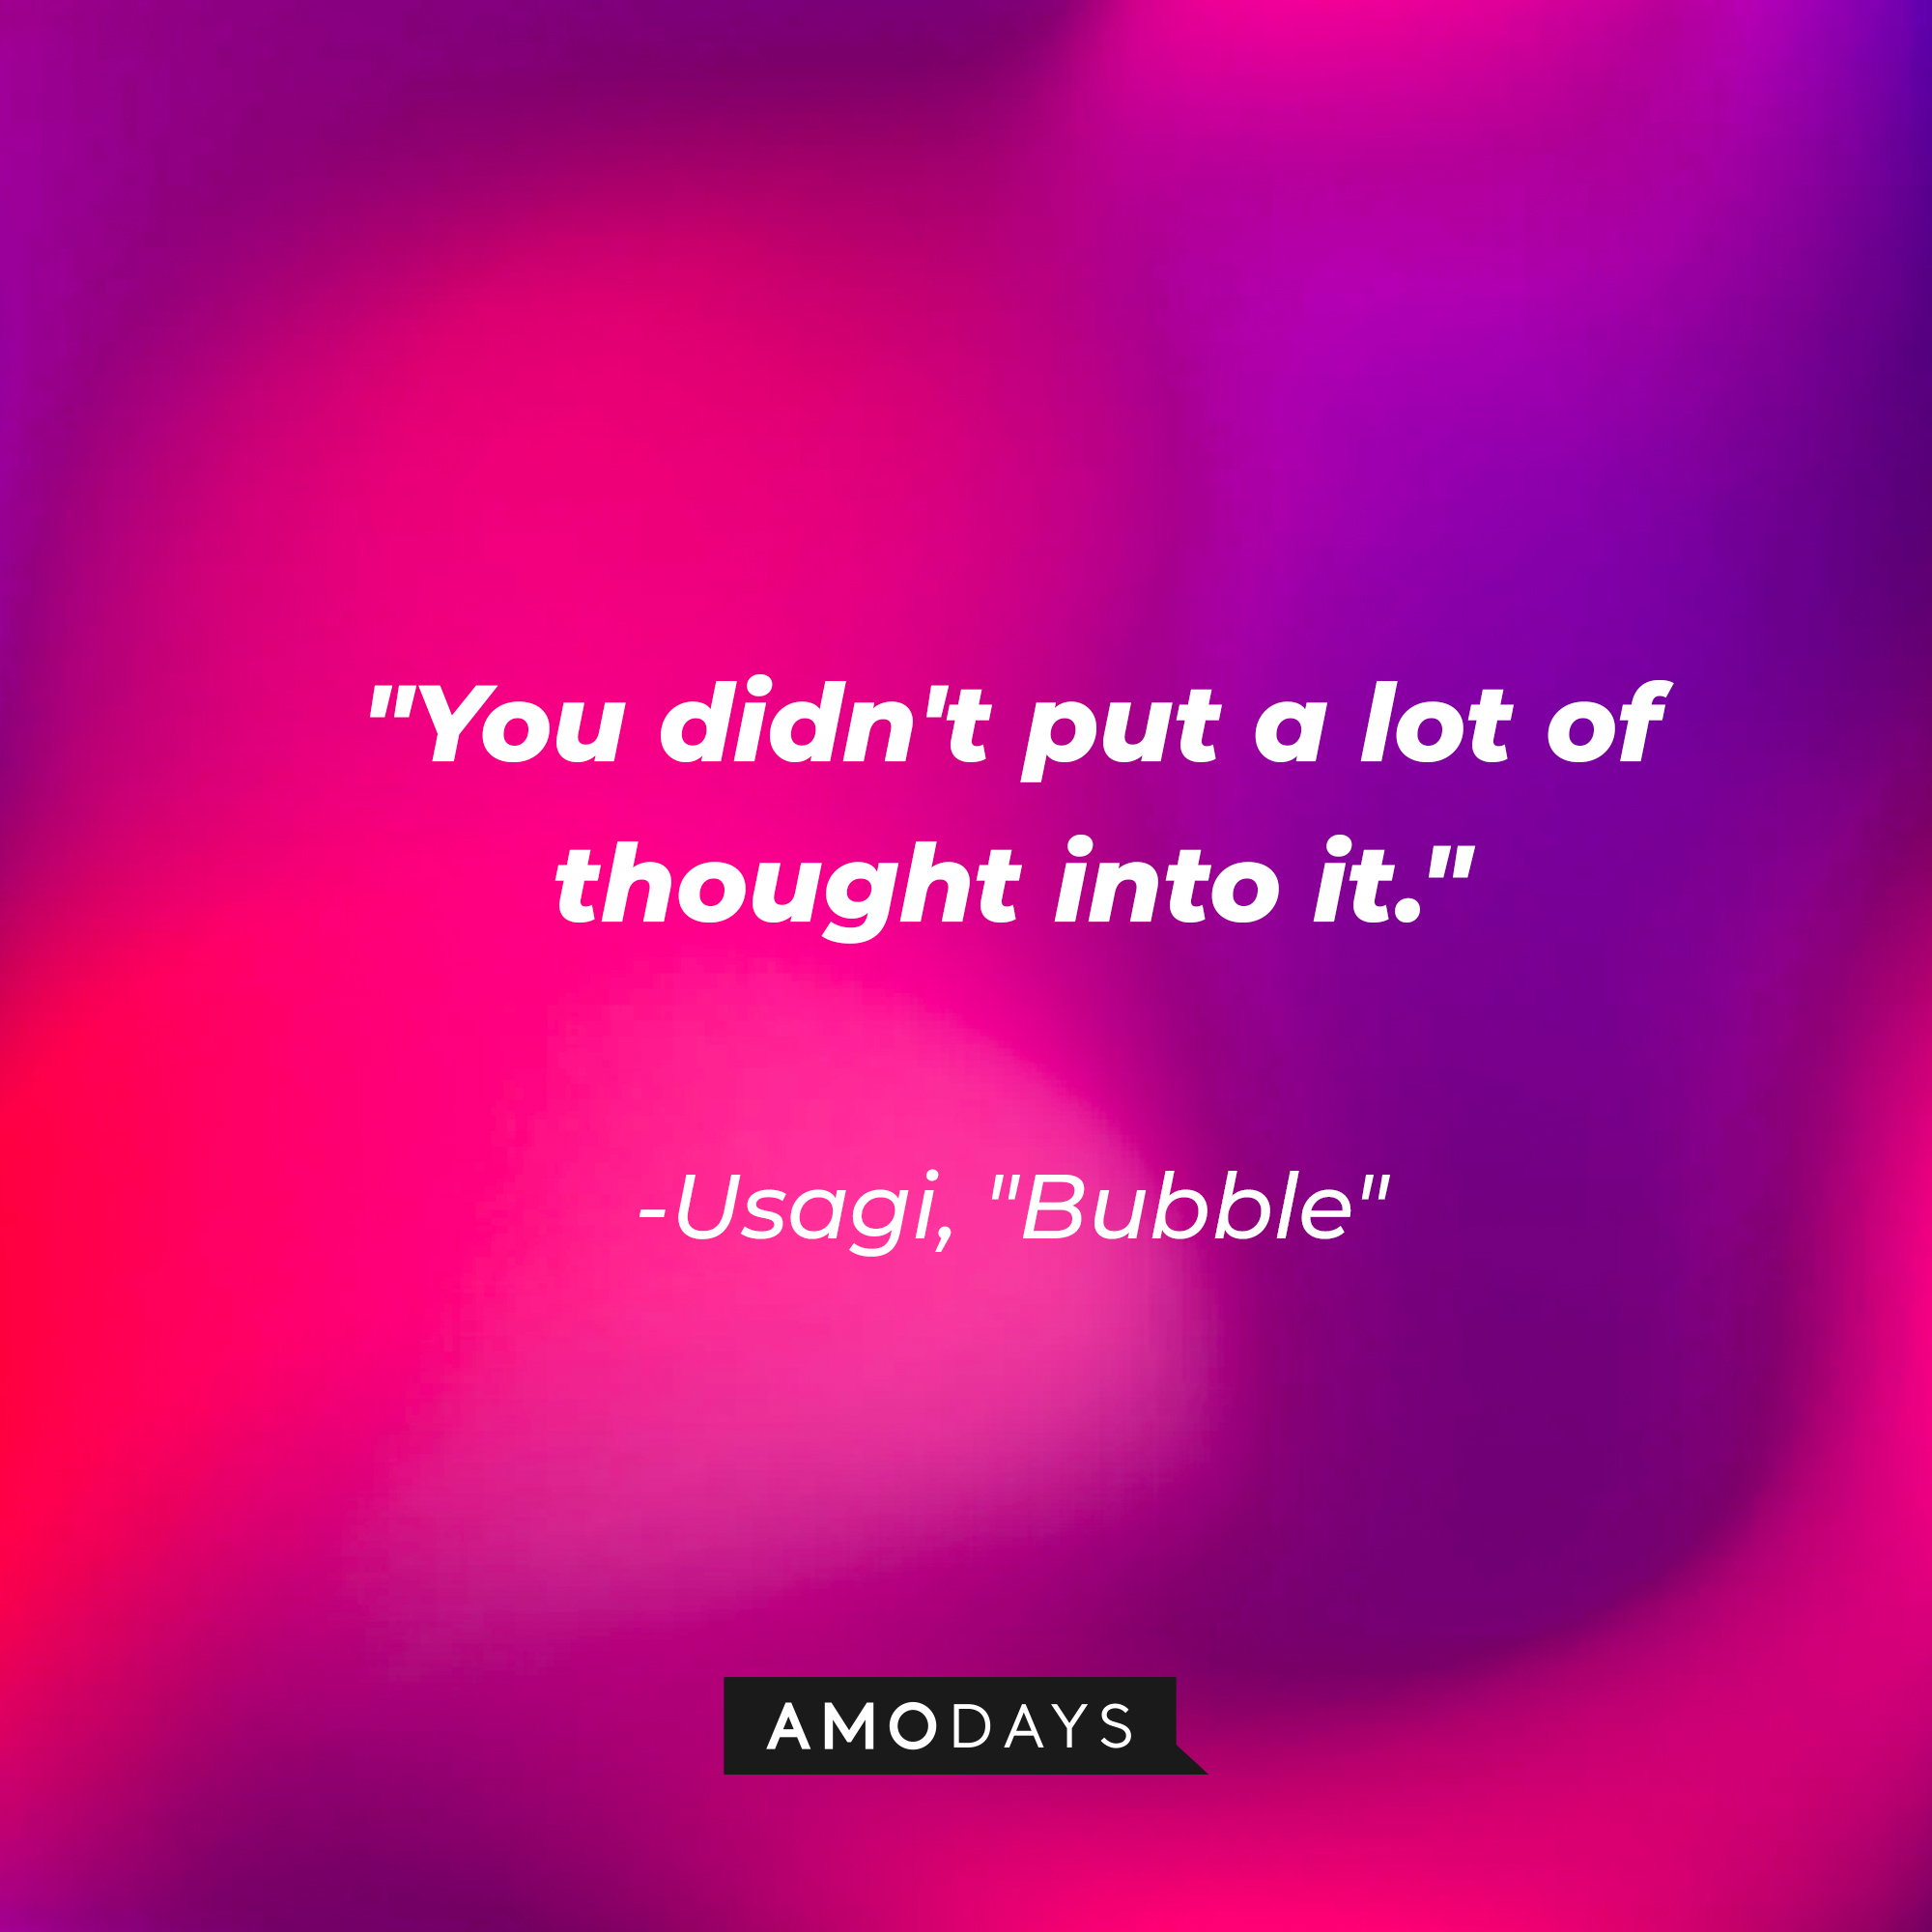 Makoto's quote on "Bubble:" "You didn't put a lot of thought into it." | Source: AmoDays